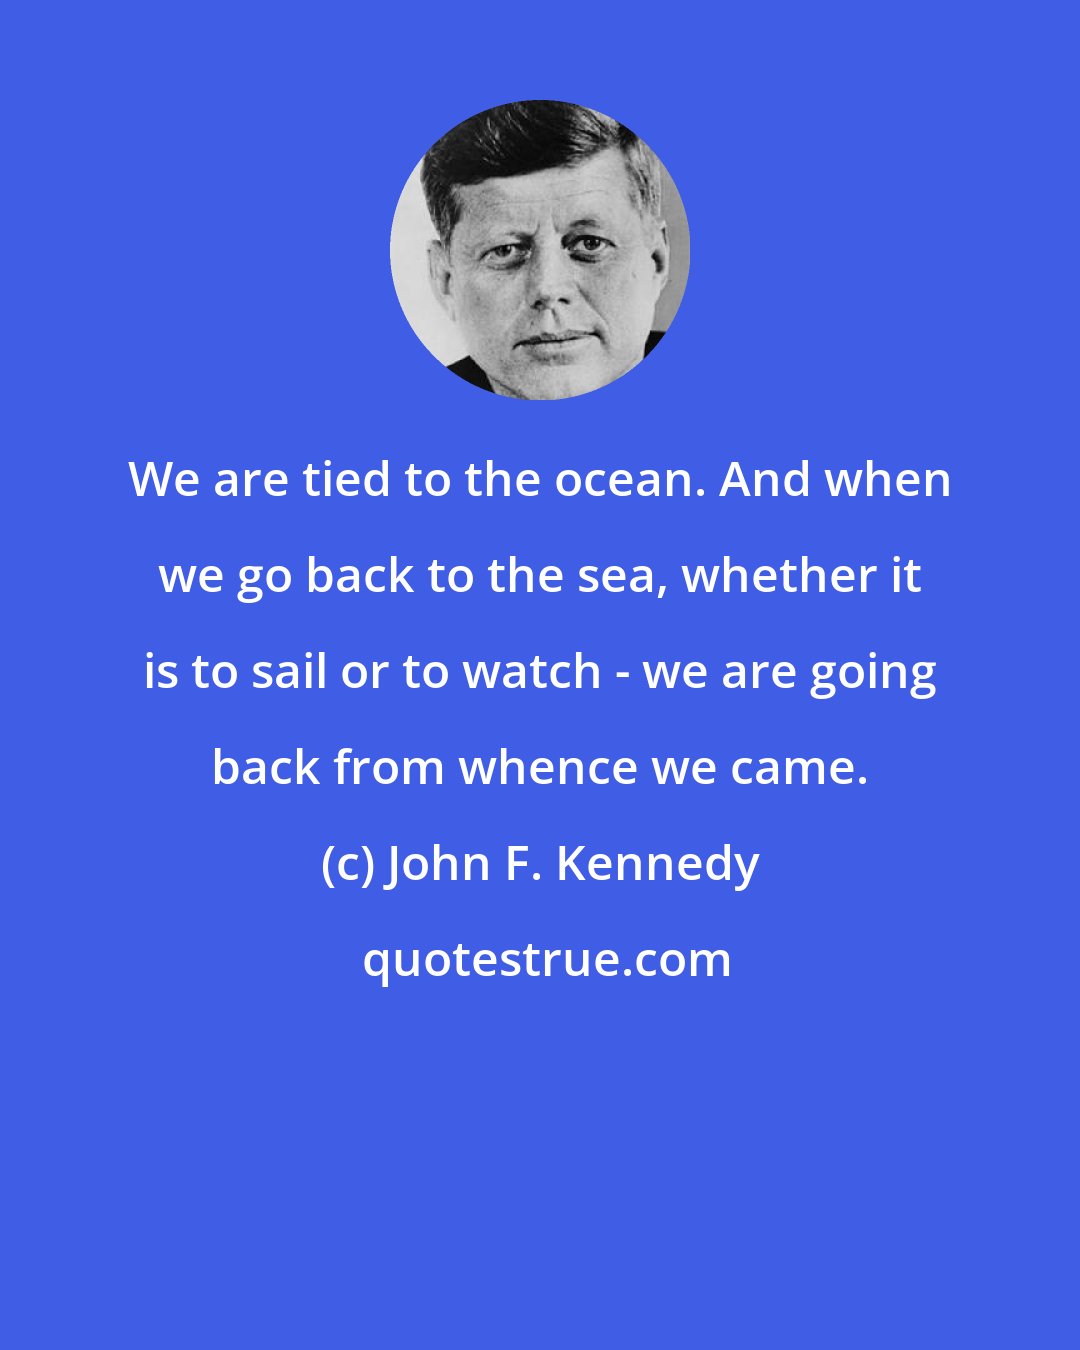 John F. Kennedy: We are tied to the ocean. And when we go back to the sea, whether it is to sail or to watch - we are going back from whence we came.